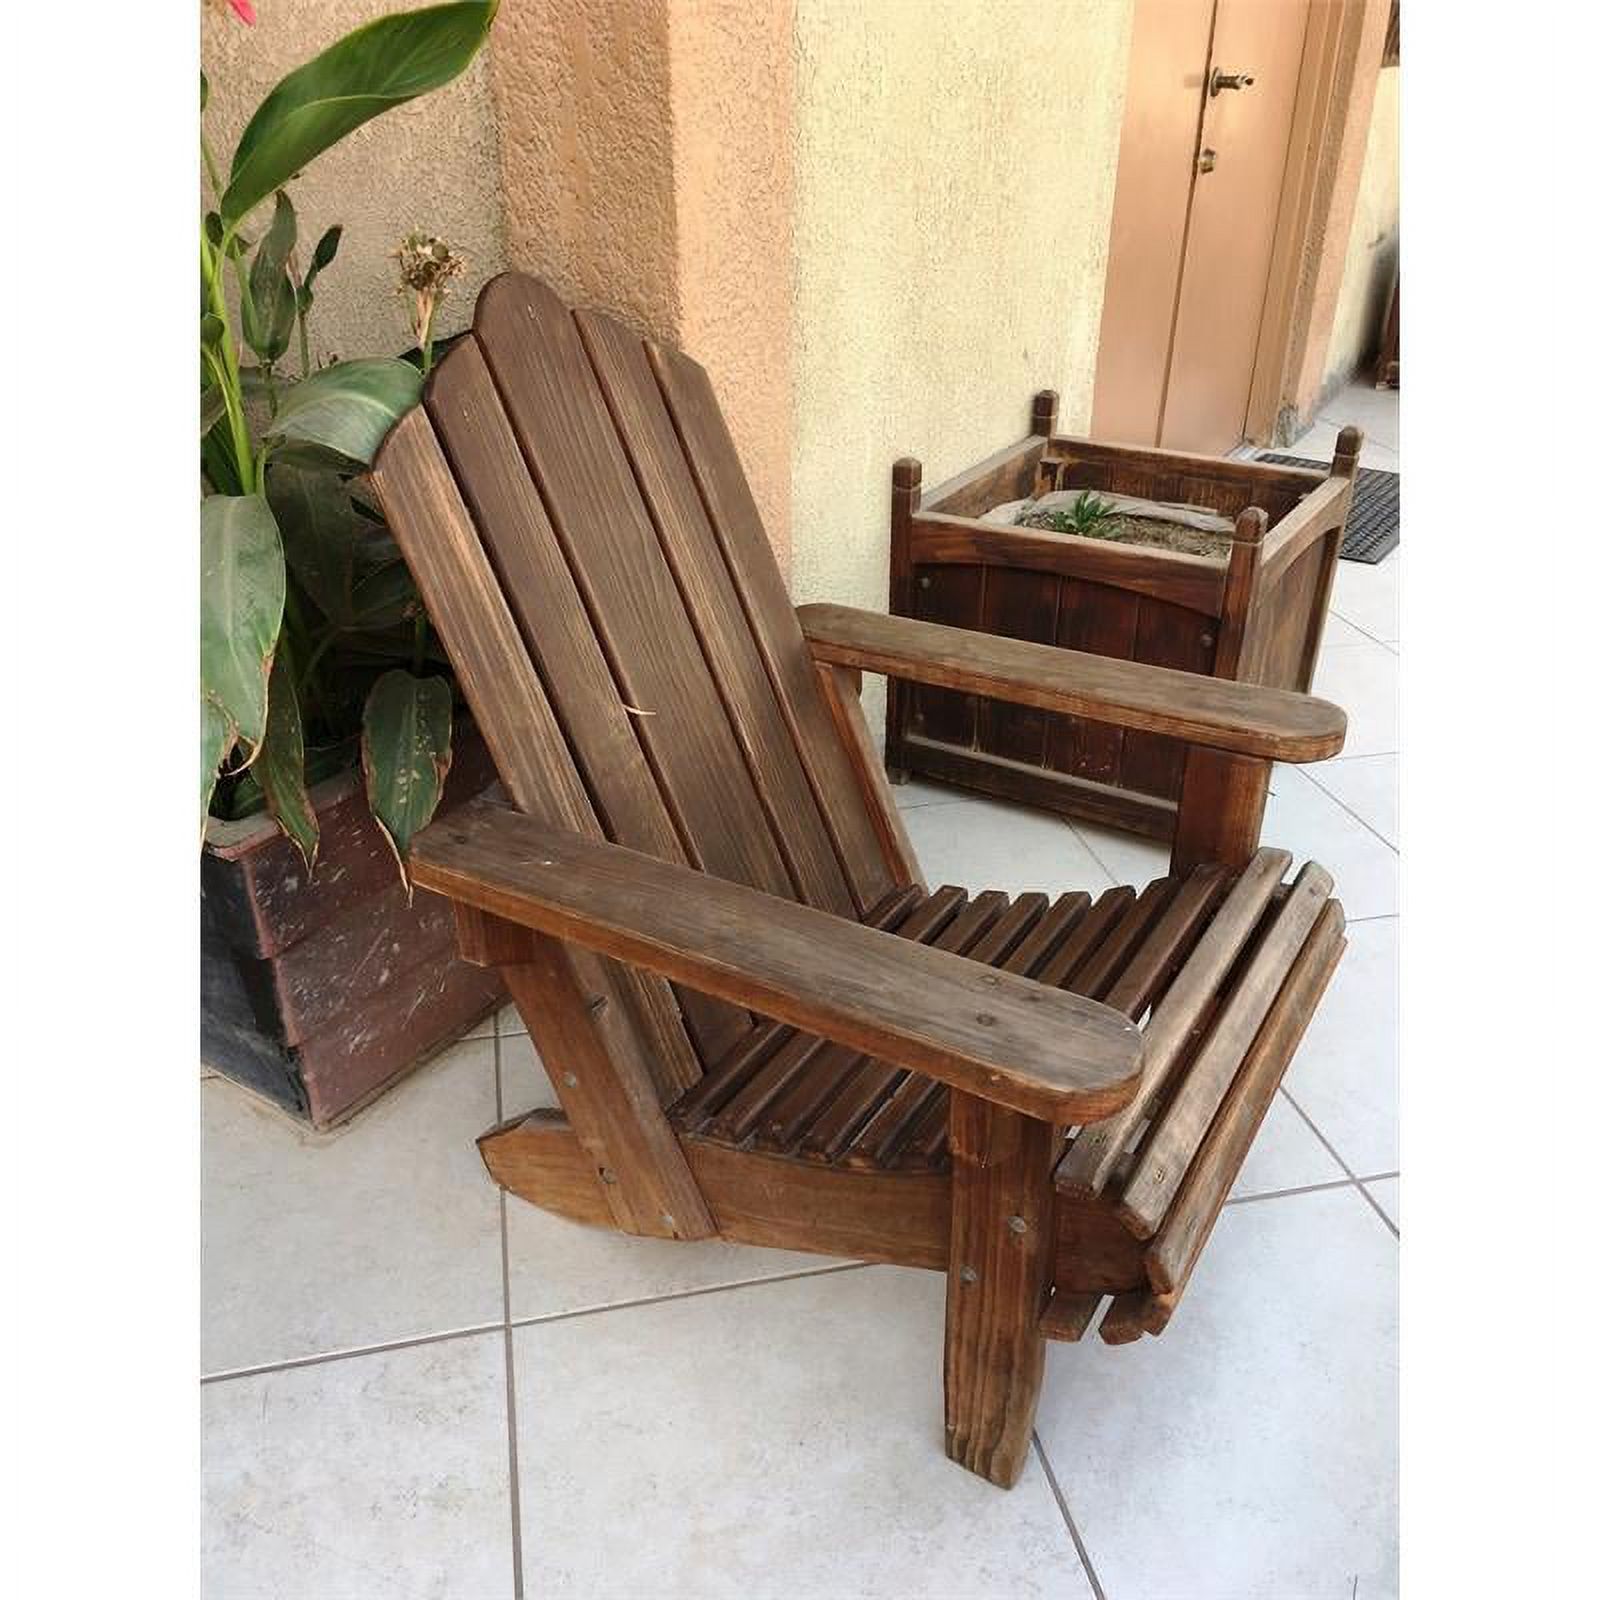 Best Redwood 36" Solid Wood Adirondack Chair in Mission Brown Stain - image 2 of 2